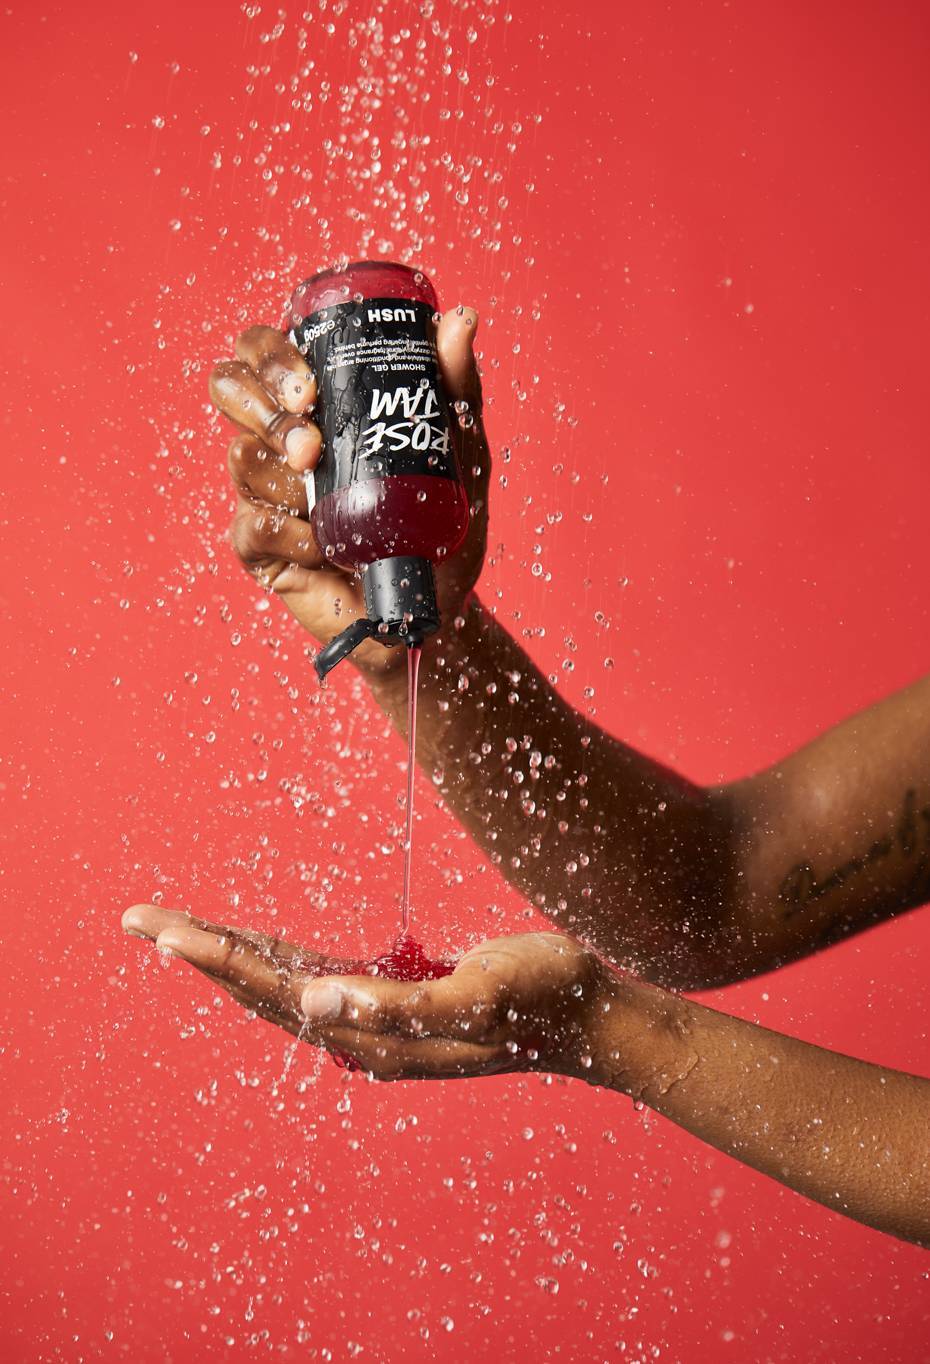 The image shows the model squeezing the Rose Jam shower gel from the bottle into their hand under running shower water. 